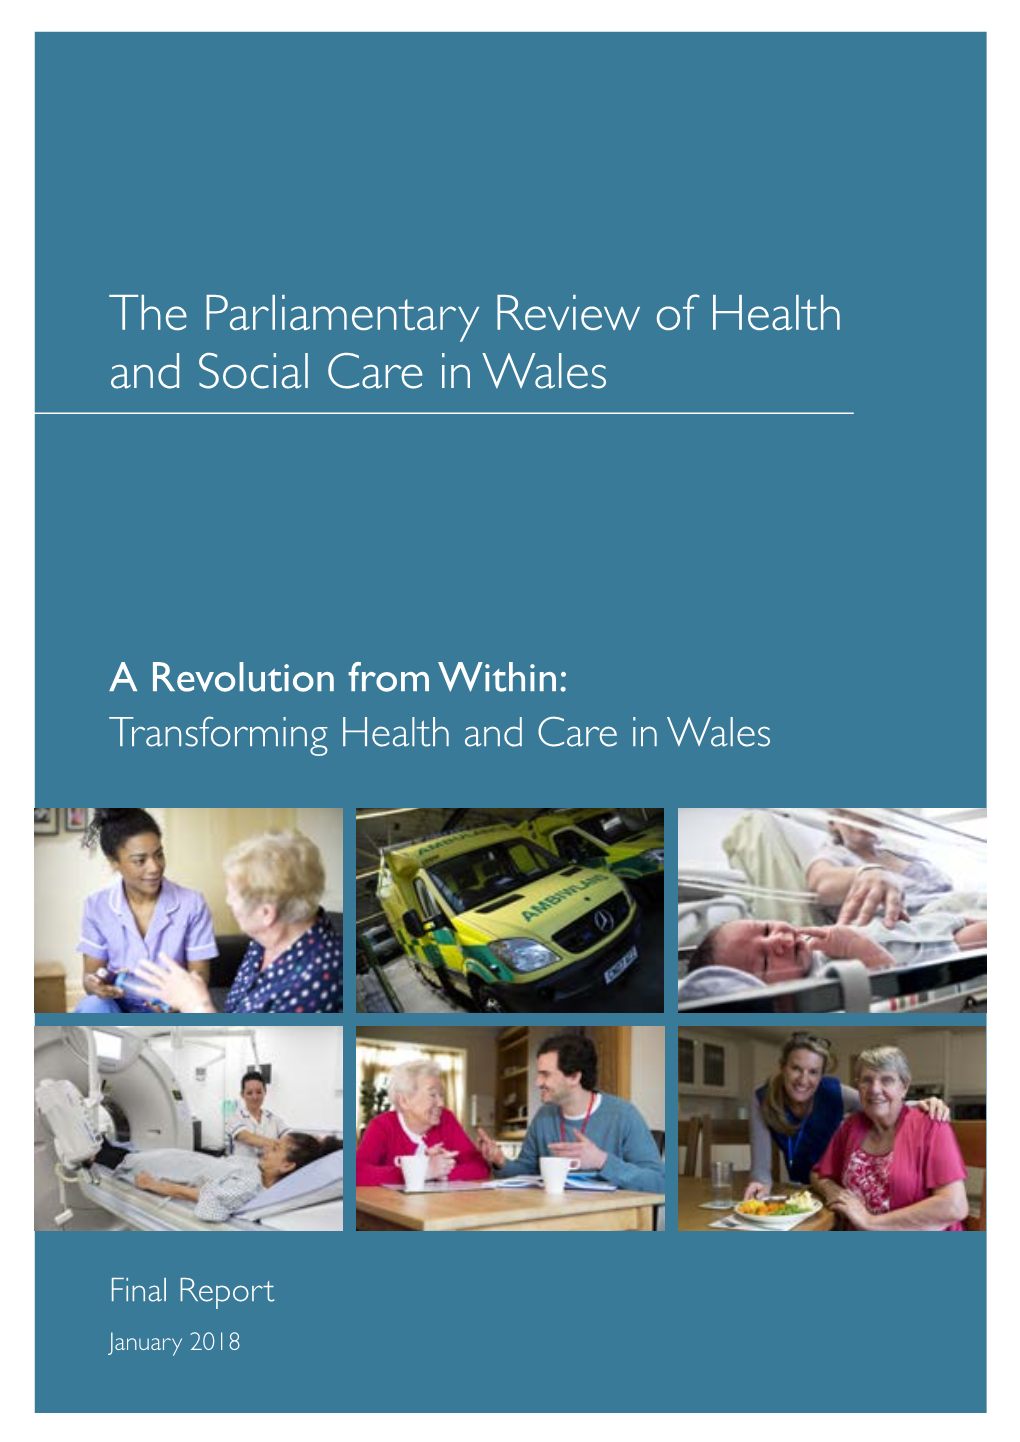 The Parliamentary Review of Health and Social Care in Wales